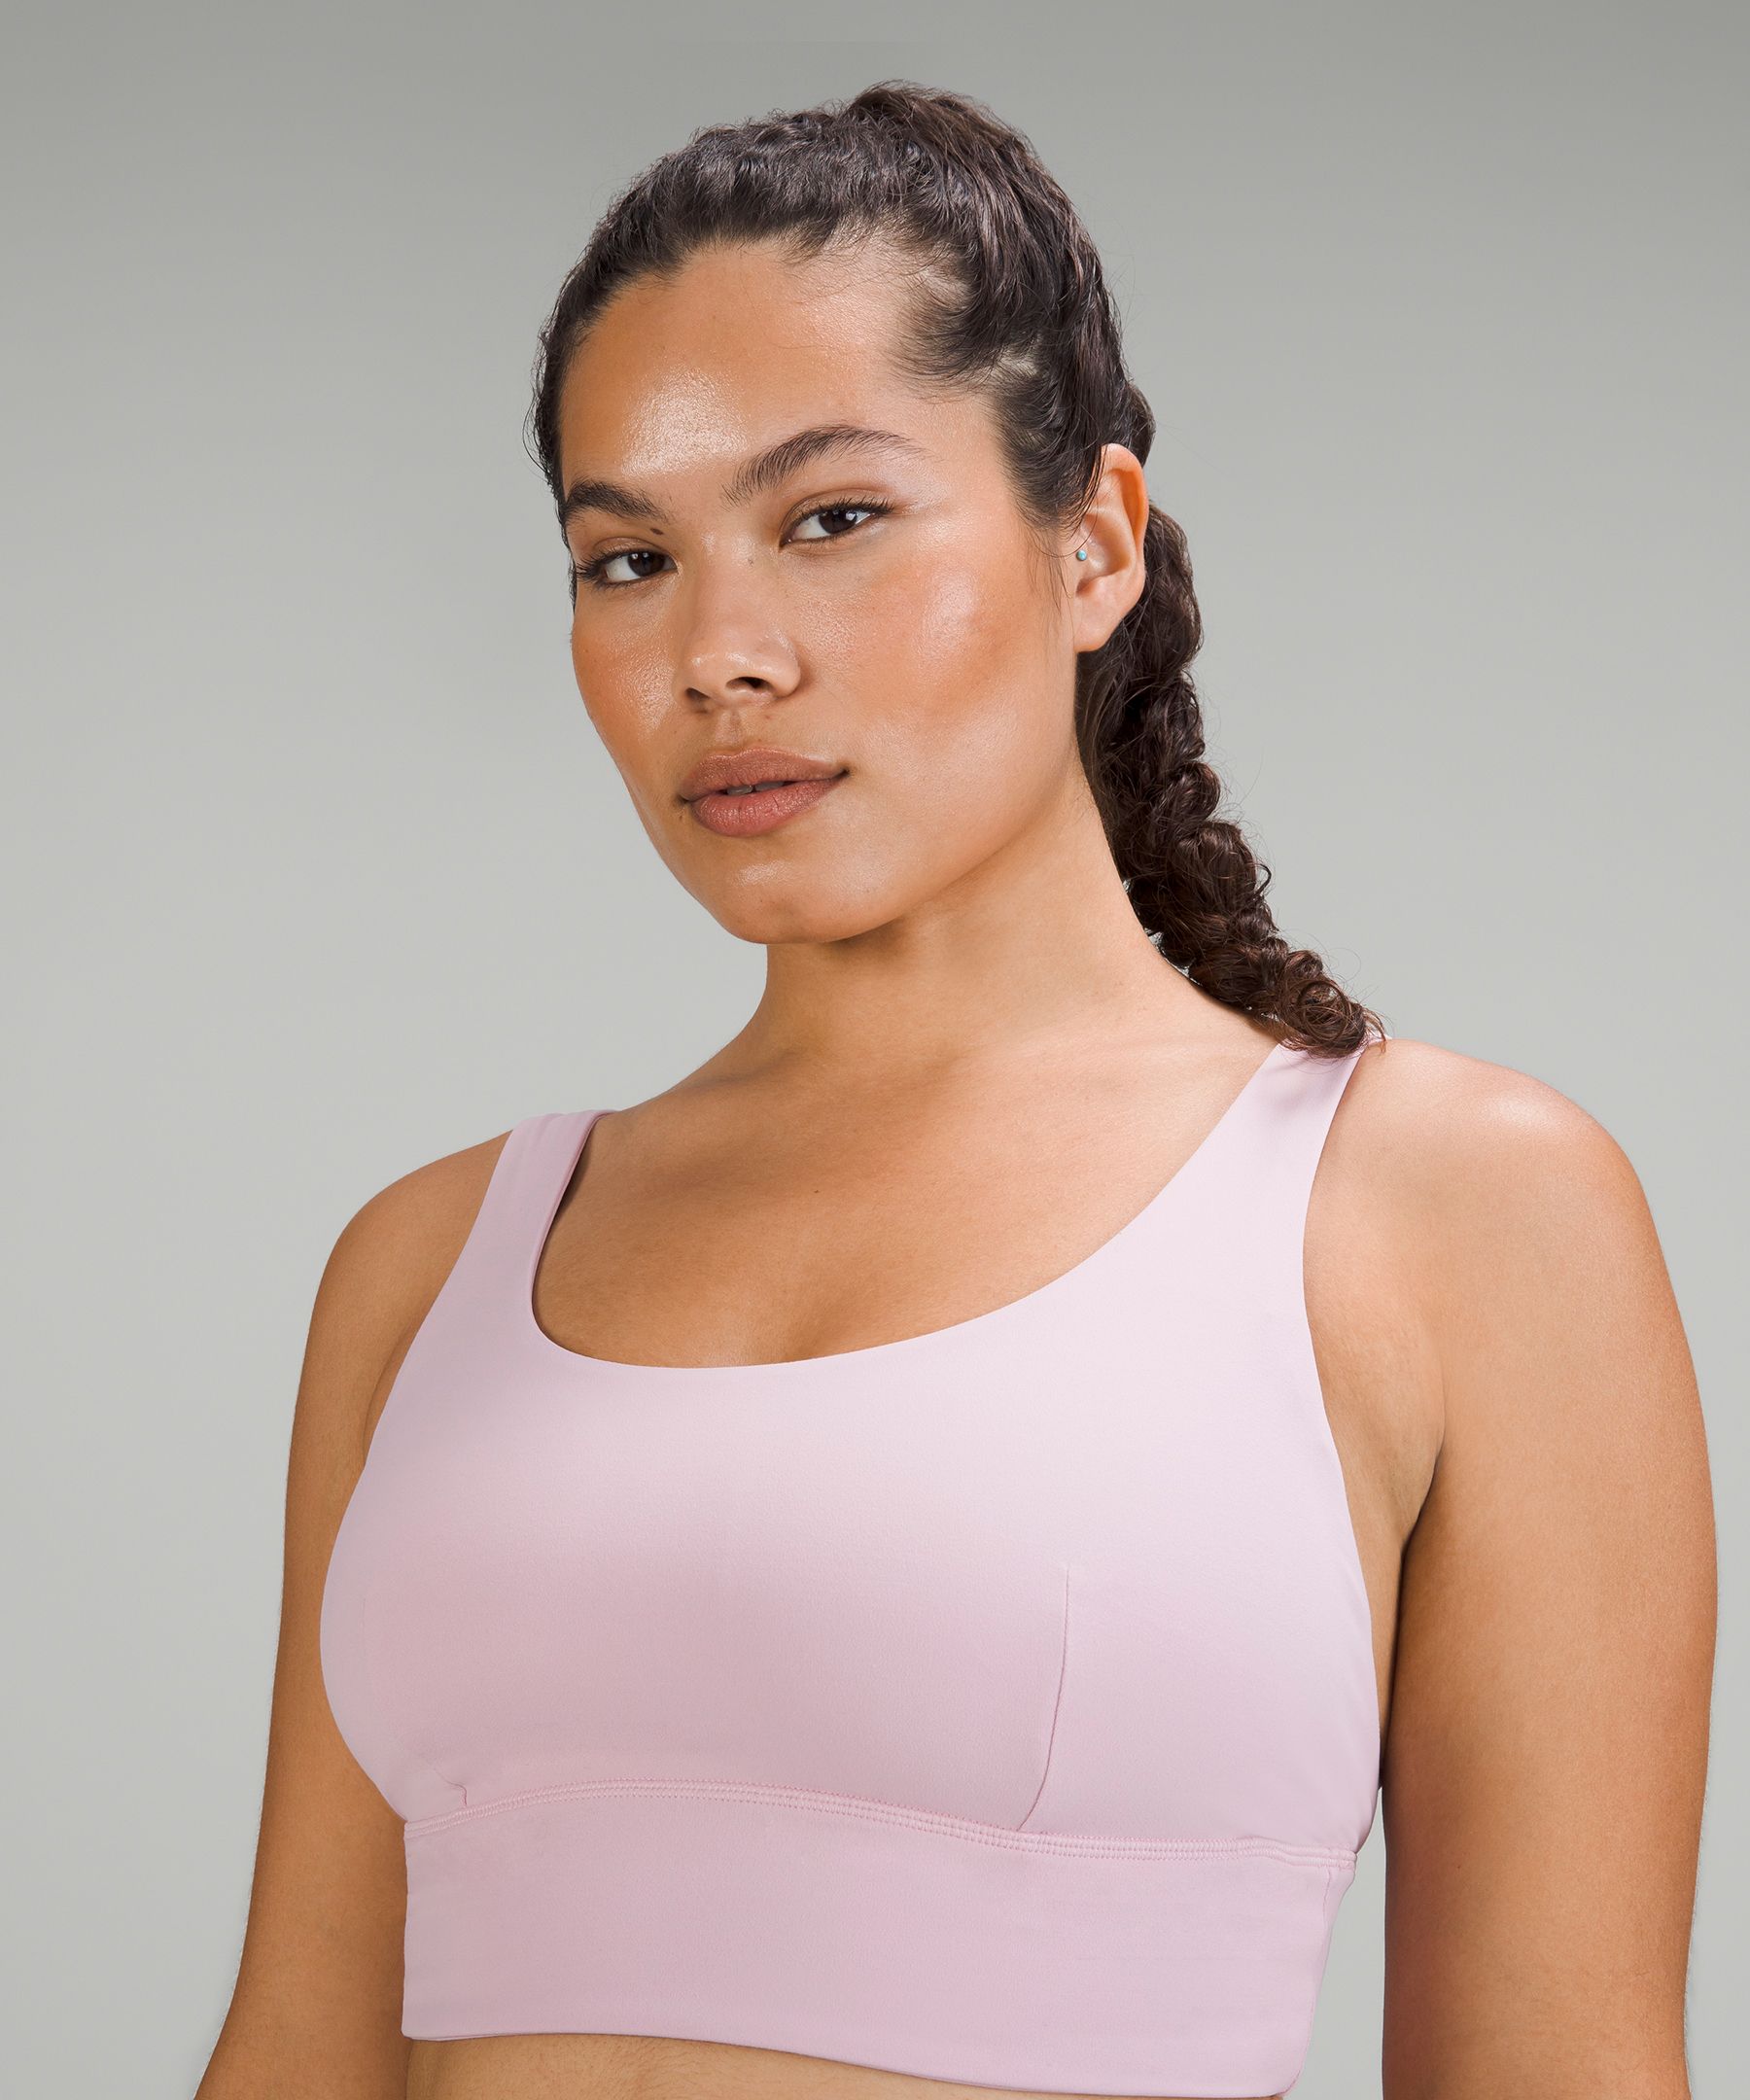 The gods have blessed us with align bra for C/D cups! : r/lululemon